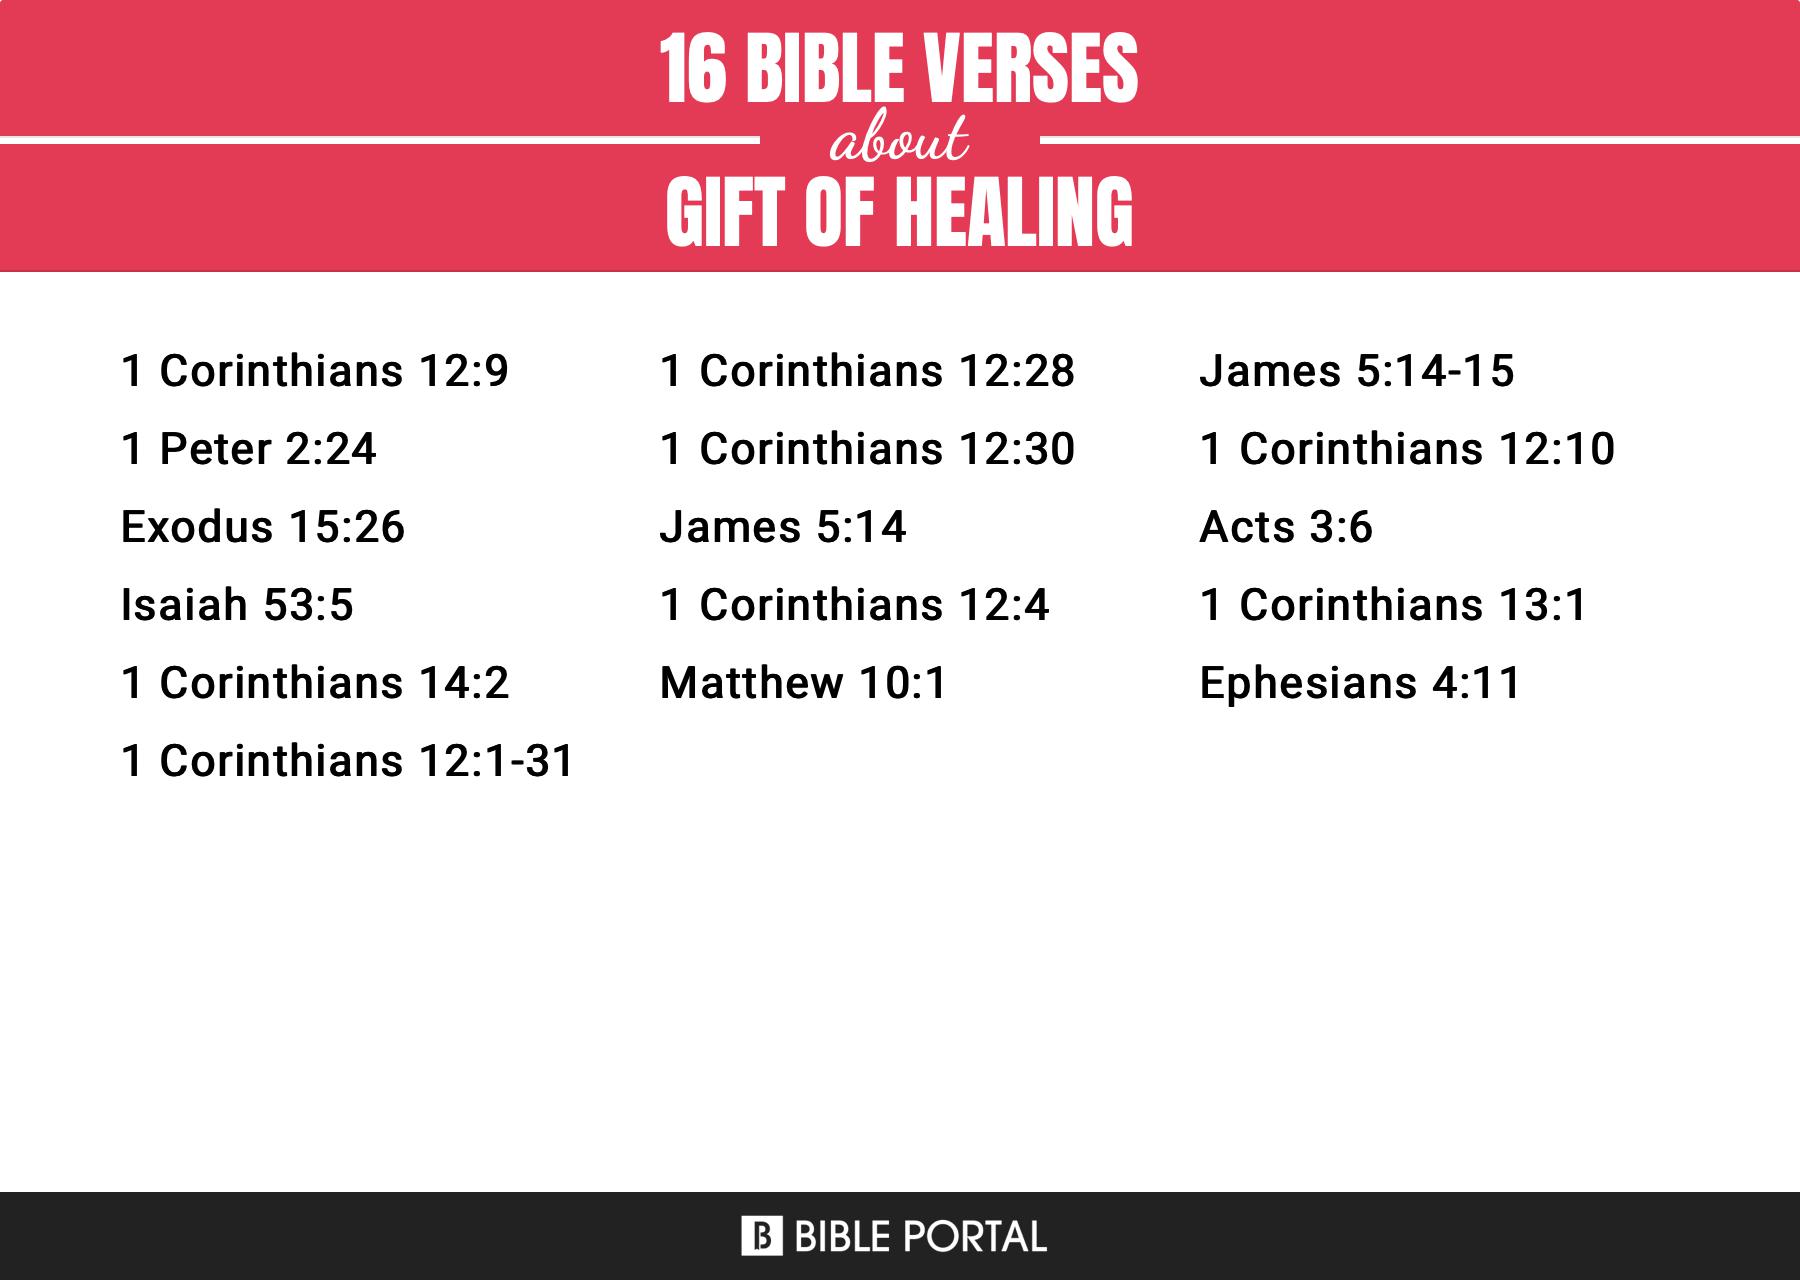 What is the spiritual gift of healing?